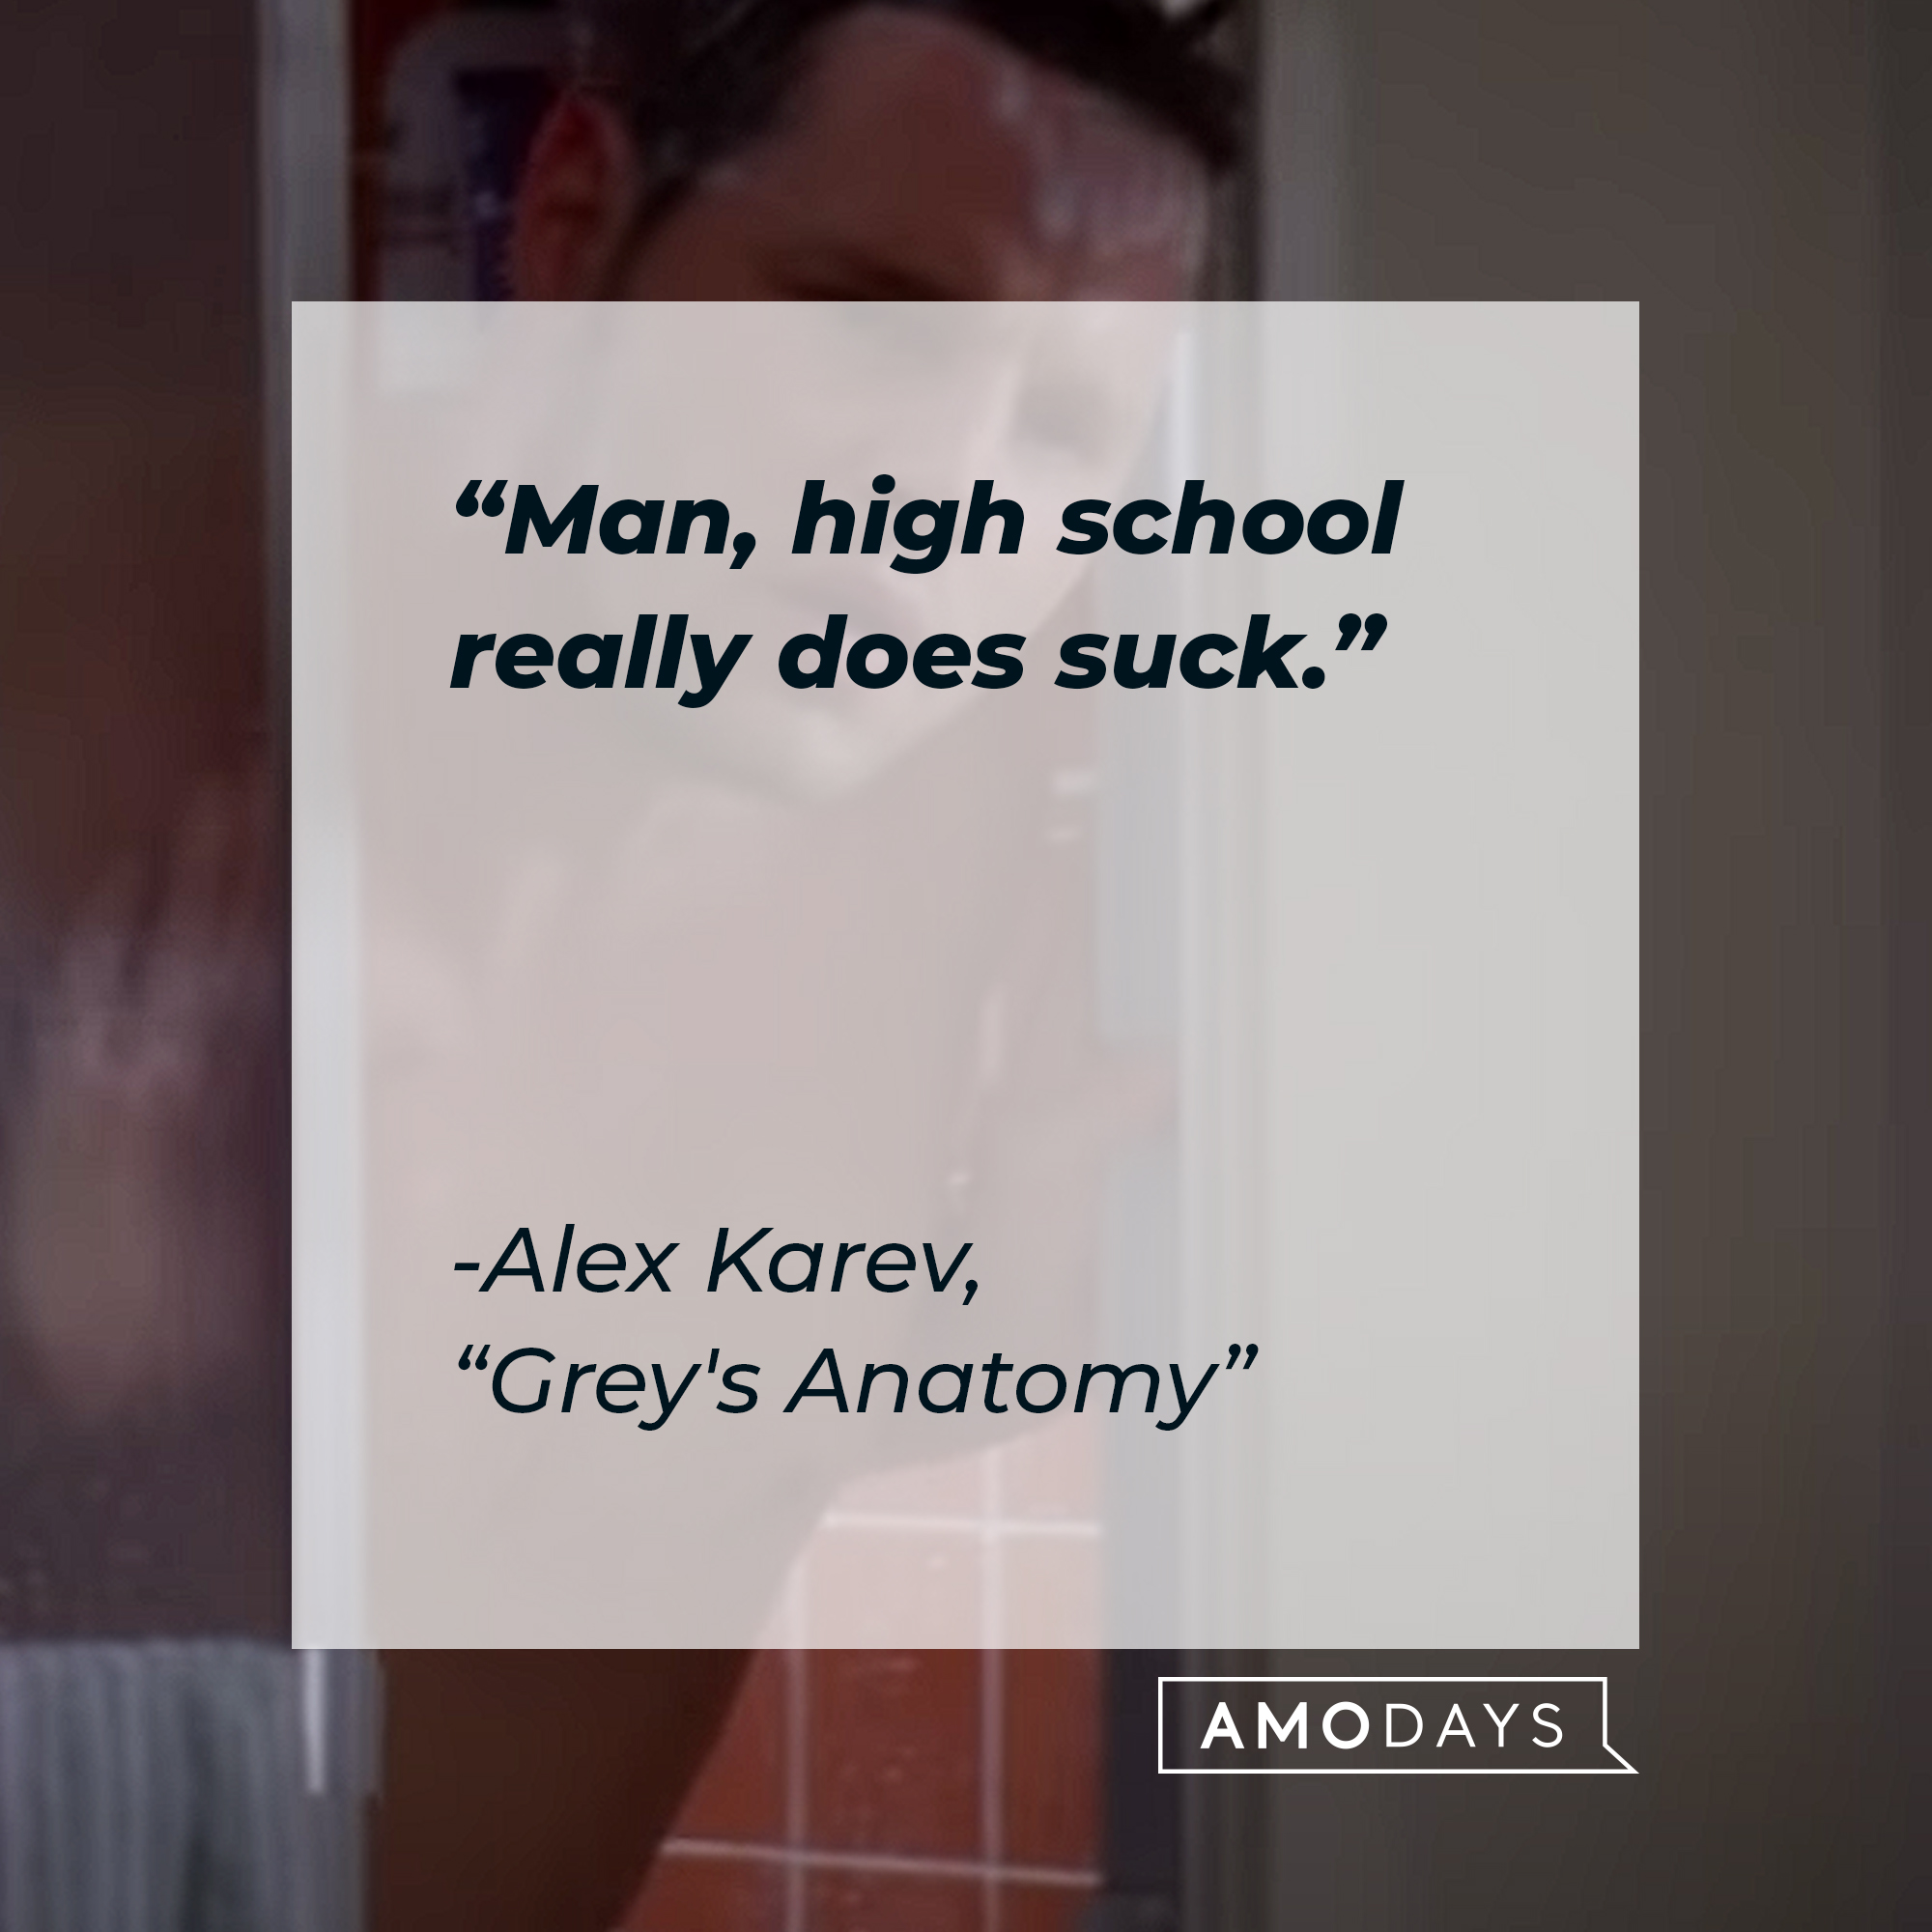 Alex Karev’s quote from “Grey’s Anatomy”: “Man, high school really does suck.” | Source: youtube.com/ABCNetworkAlex Karev’s quote from “Grey’s Anatomy”: “” | Source: youtube.com/ABCNetwork